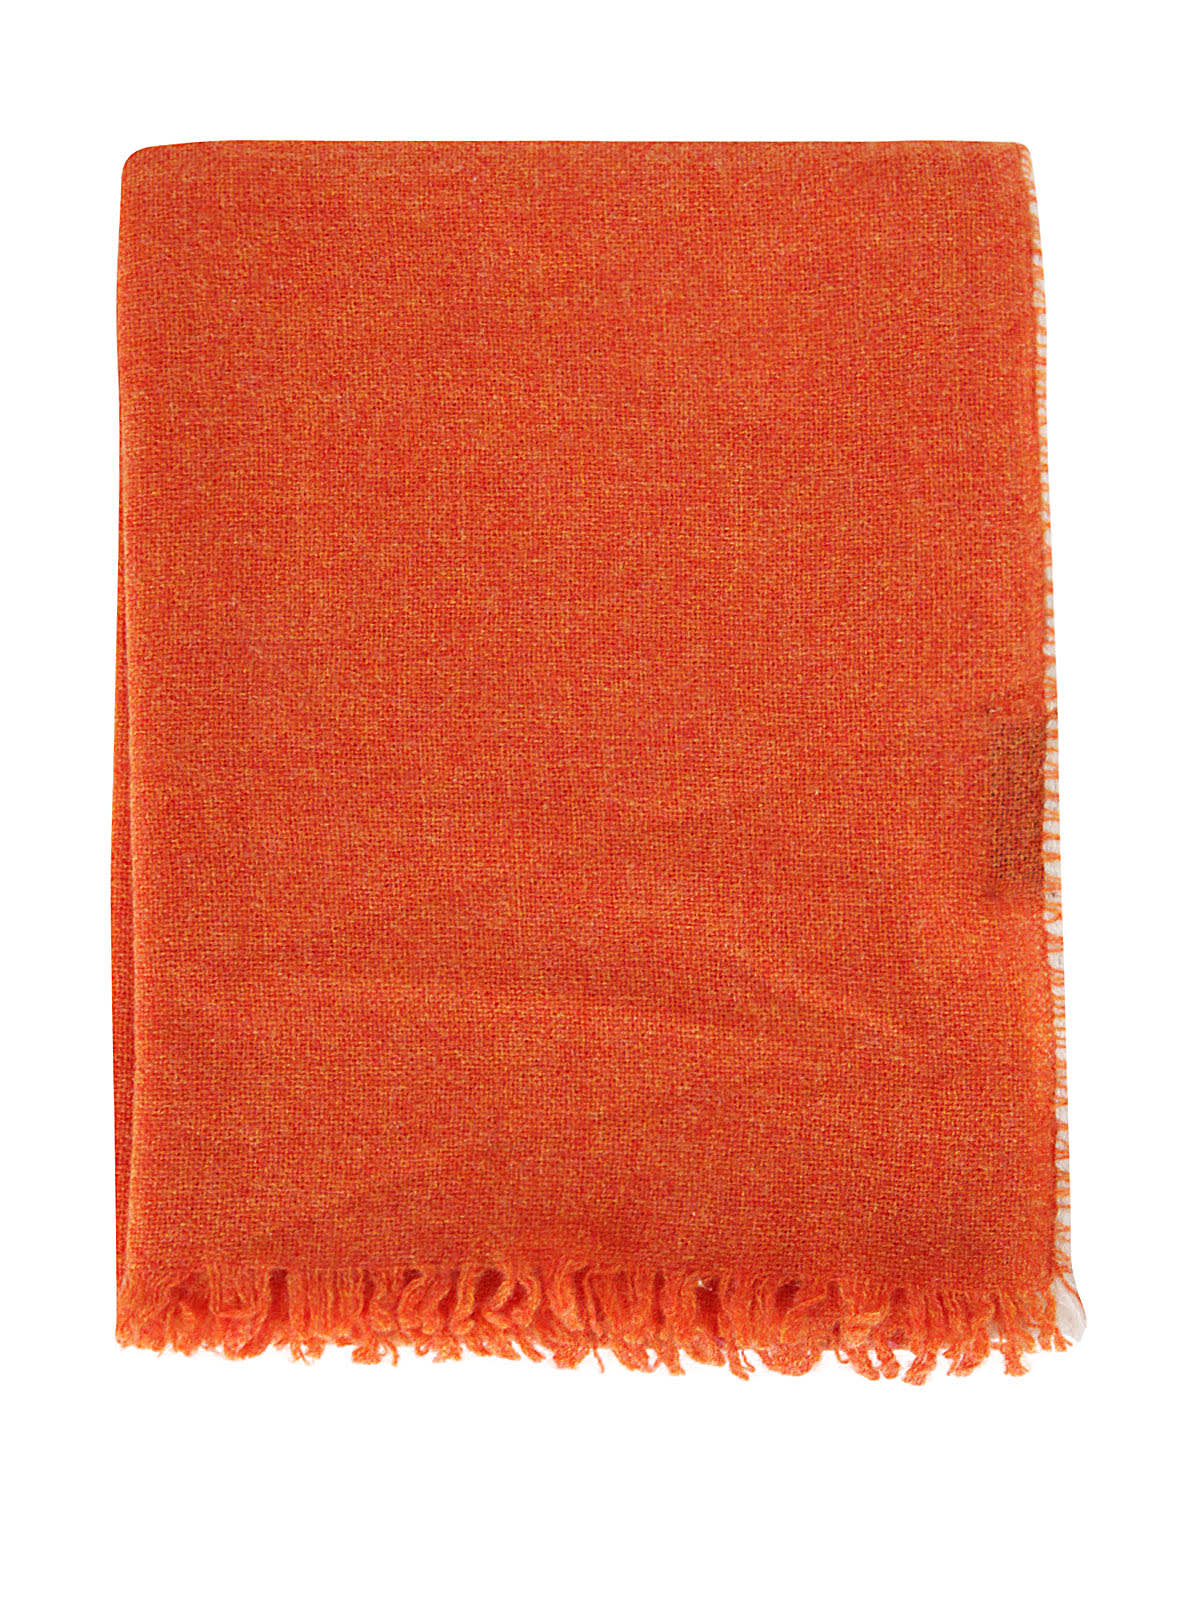 Oats & Rice Weaver Cashmere Scarf